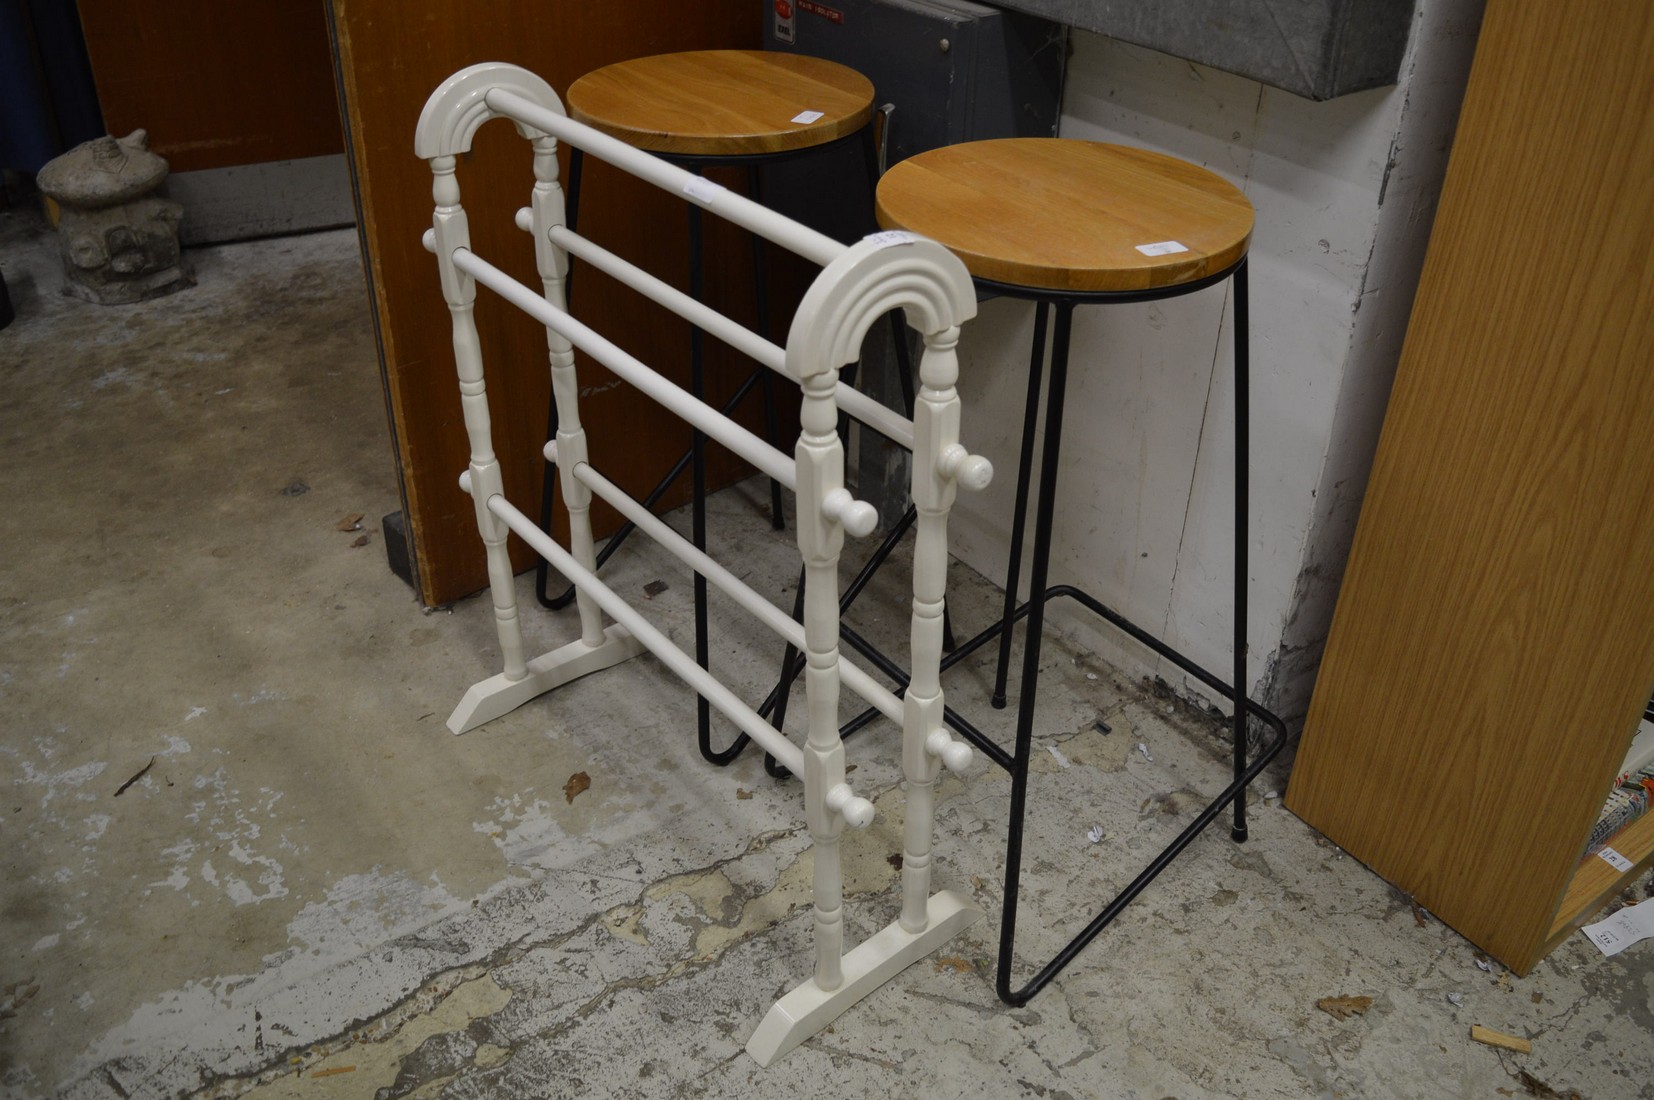 A painted towel rail and a pair of stools.